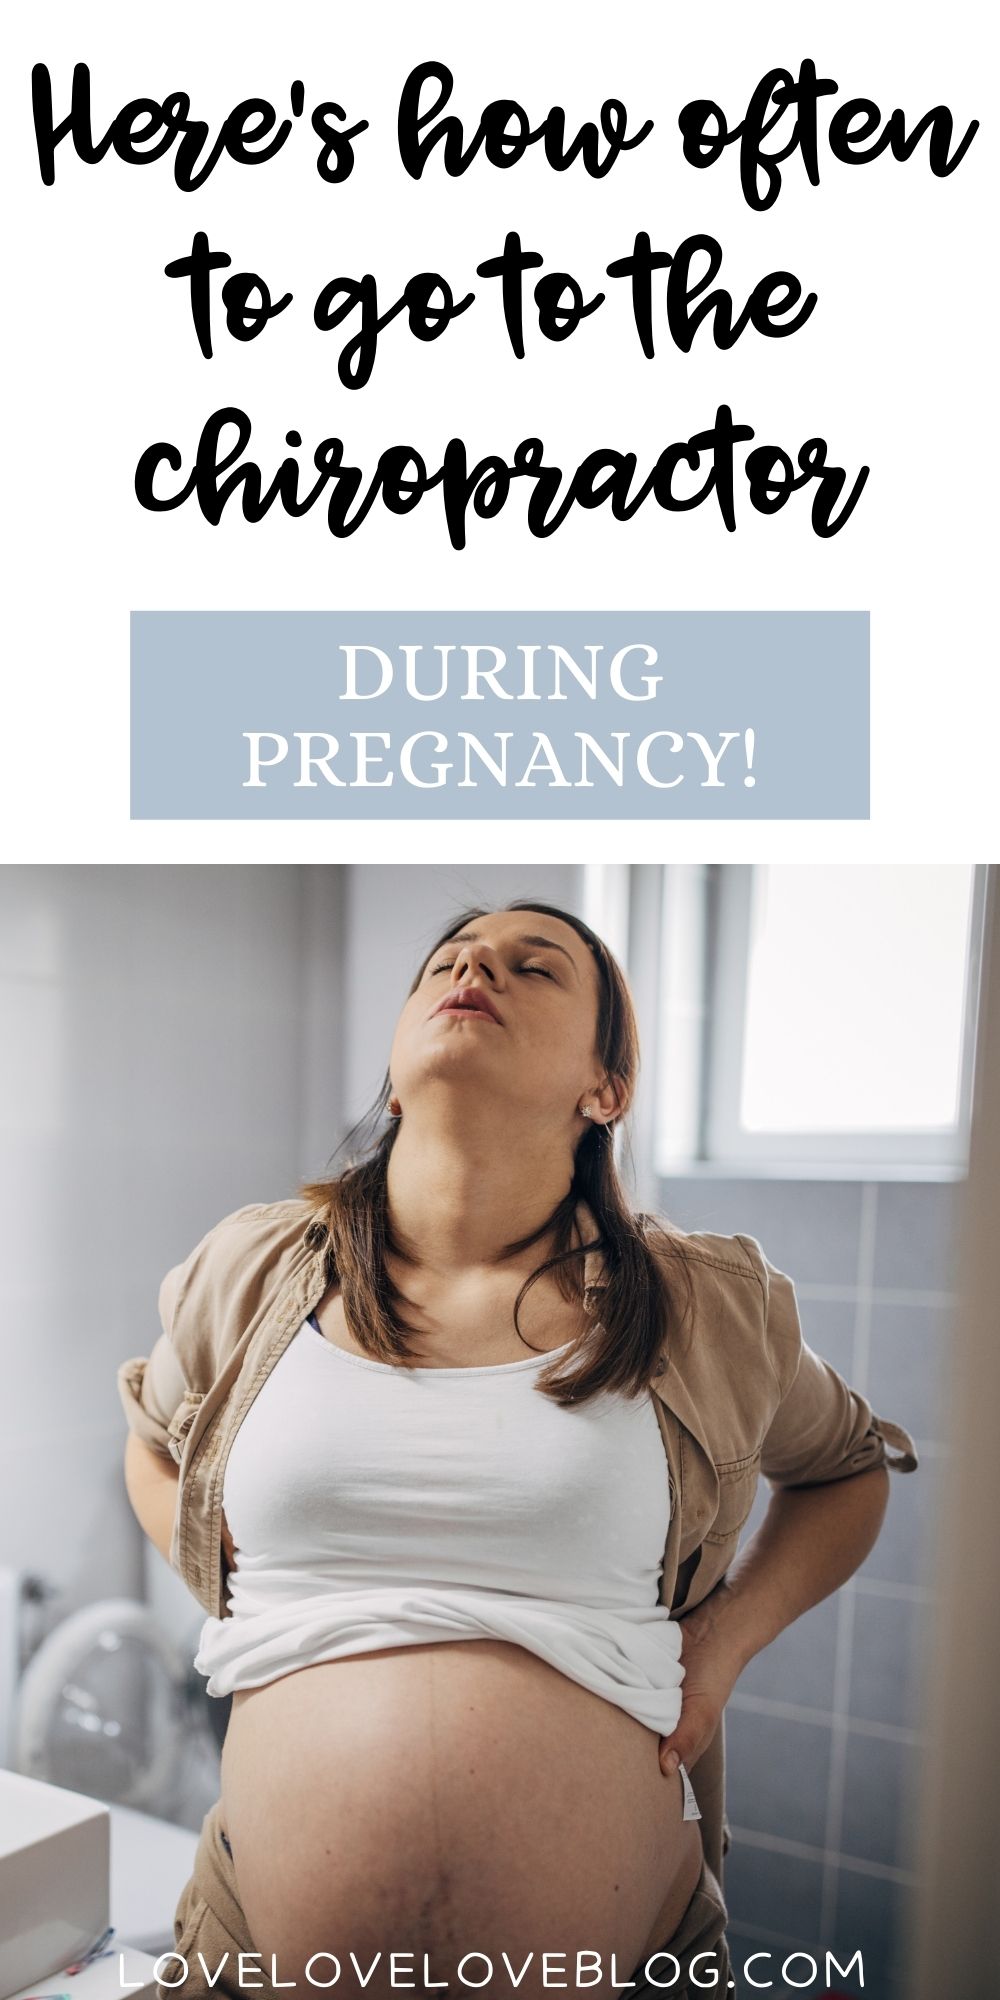 Pinterest graphic with text and pregnant woman arching her back in pain.